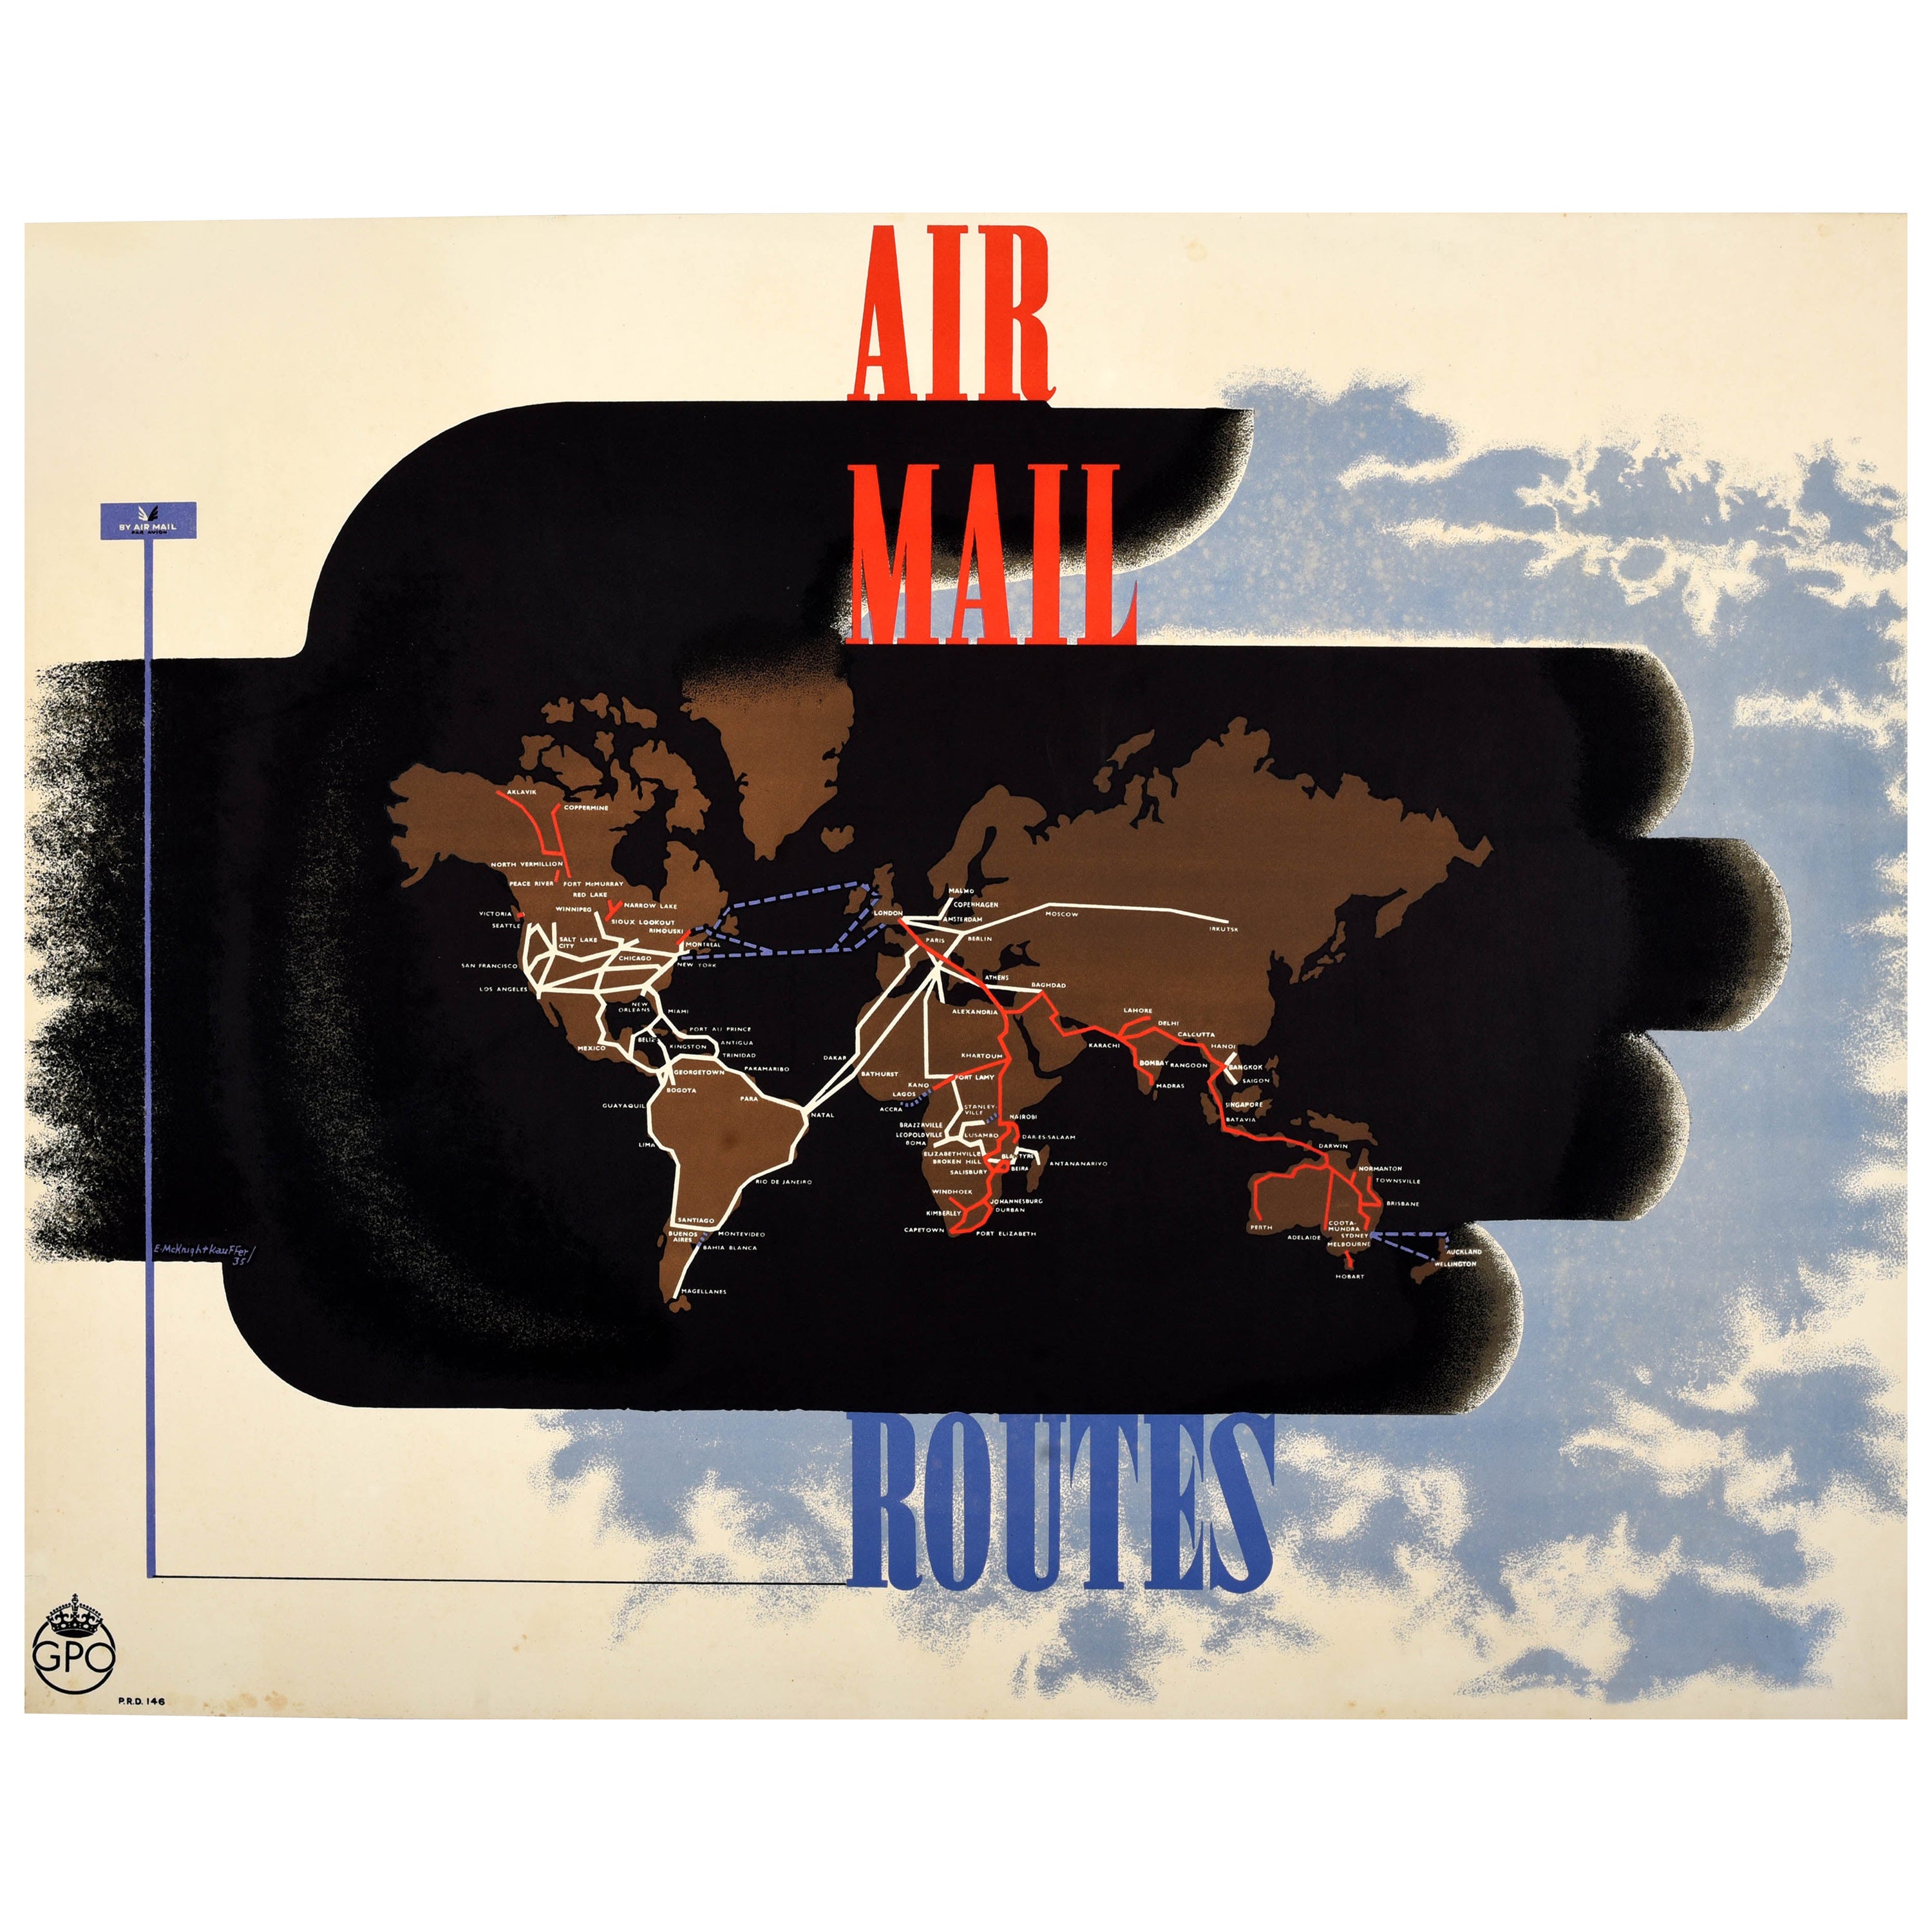 Rare Original Vintage Advertising Poster Air Mail Routes GPO Mcknight Kauffer For Sale